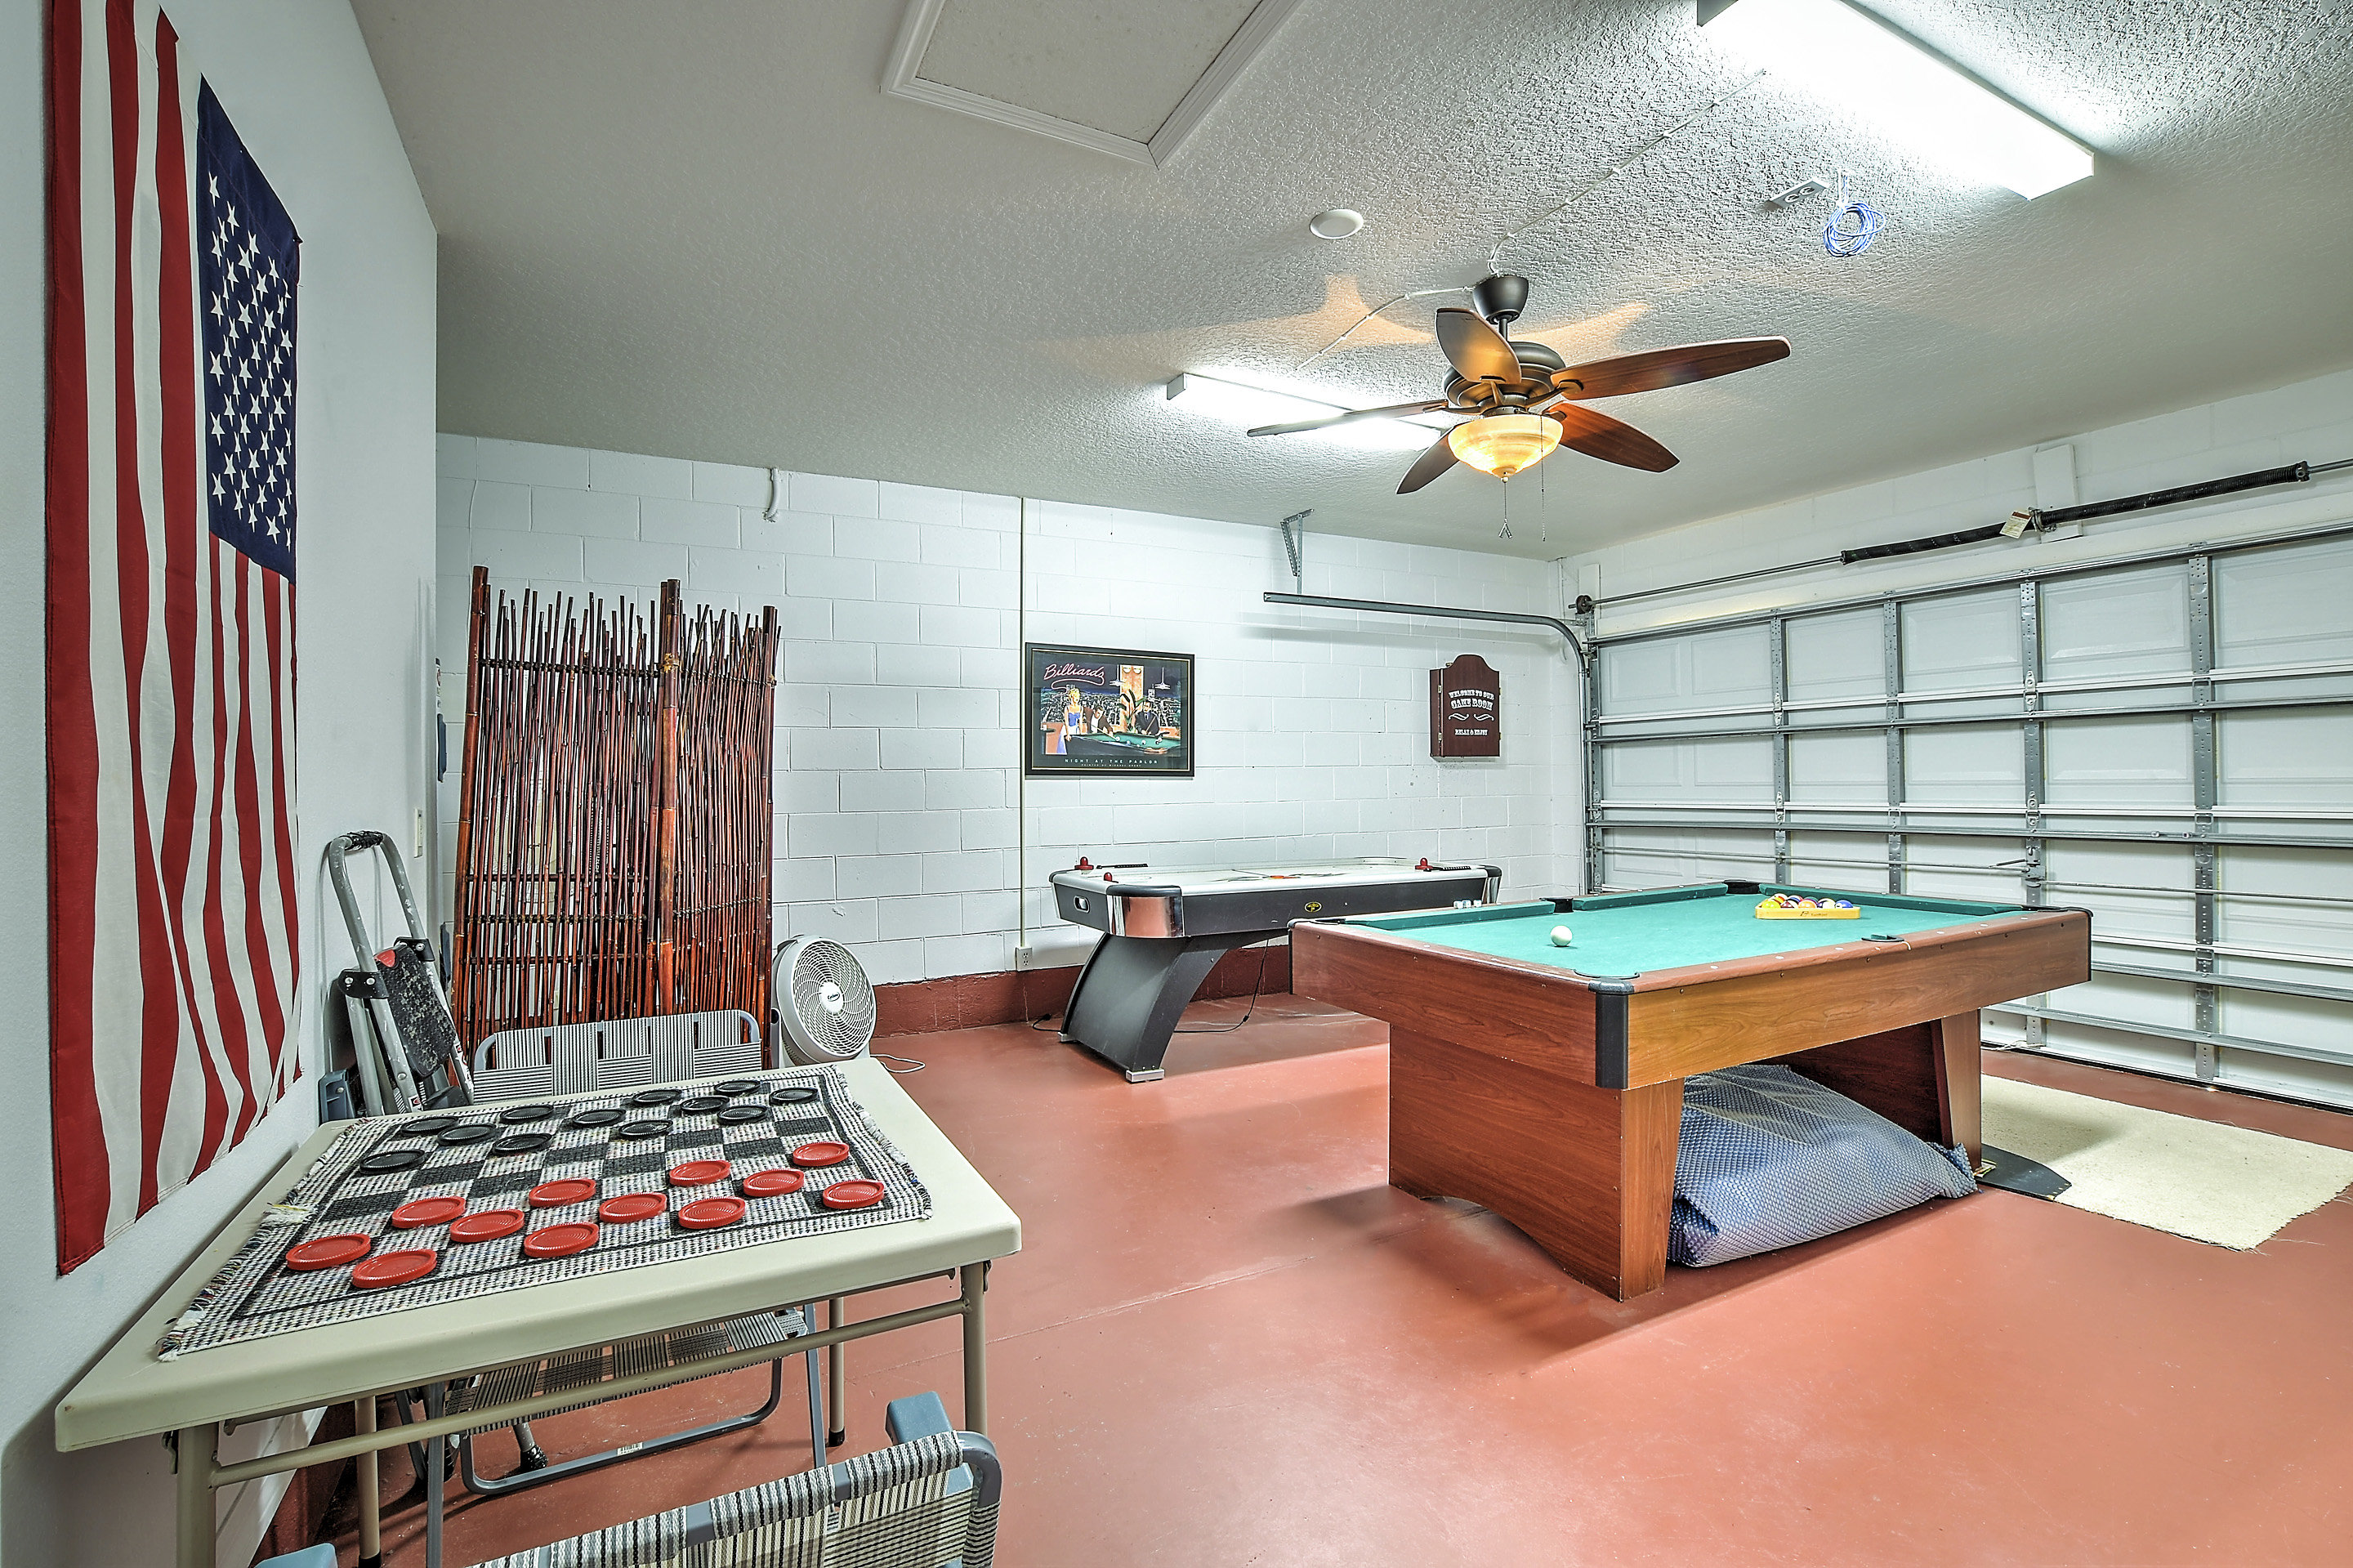 Picture Gallery. Games room